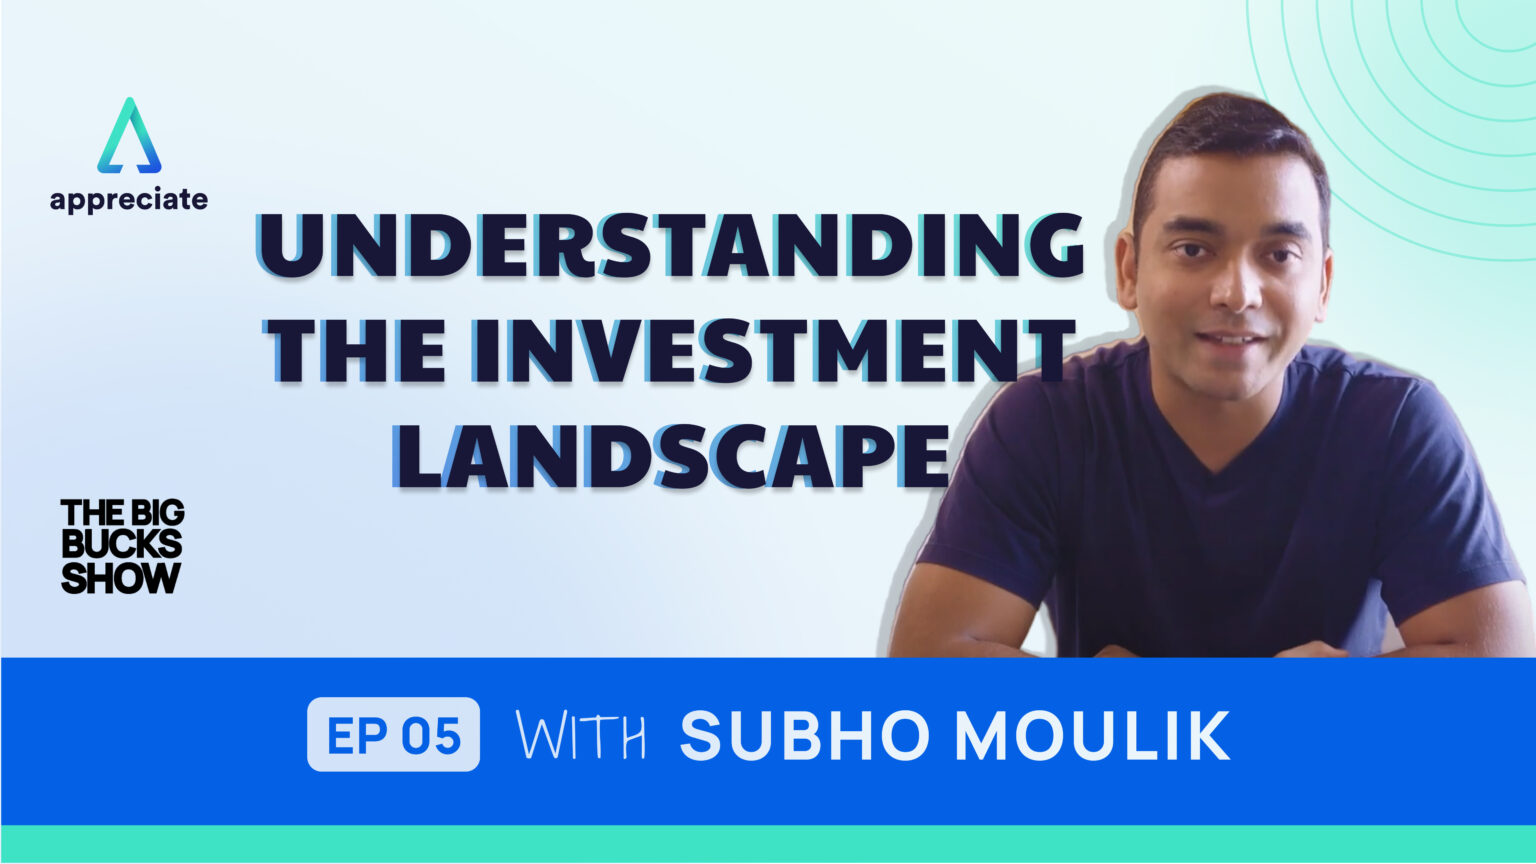 Understanding the investment landscape is the title of a podcast that is hosted by Subho. This is also a YouTube video thumbnail.